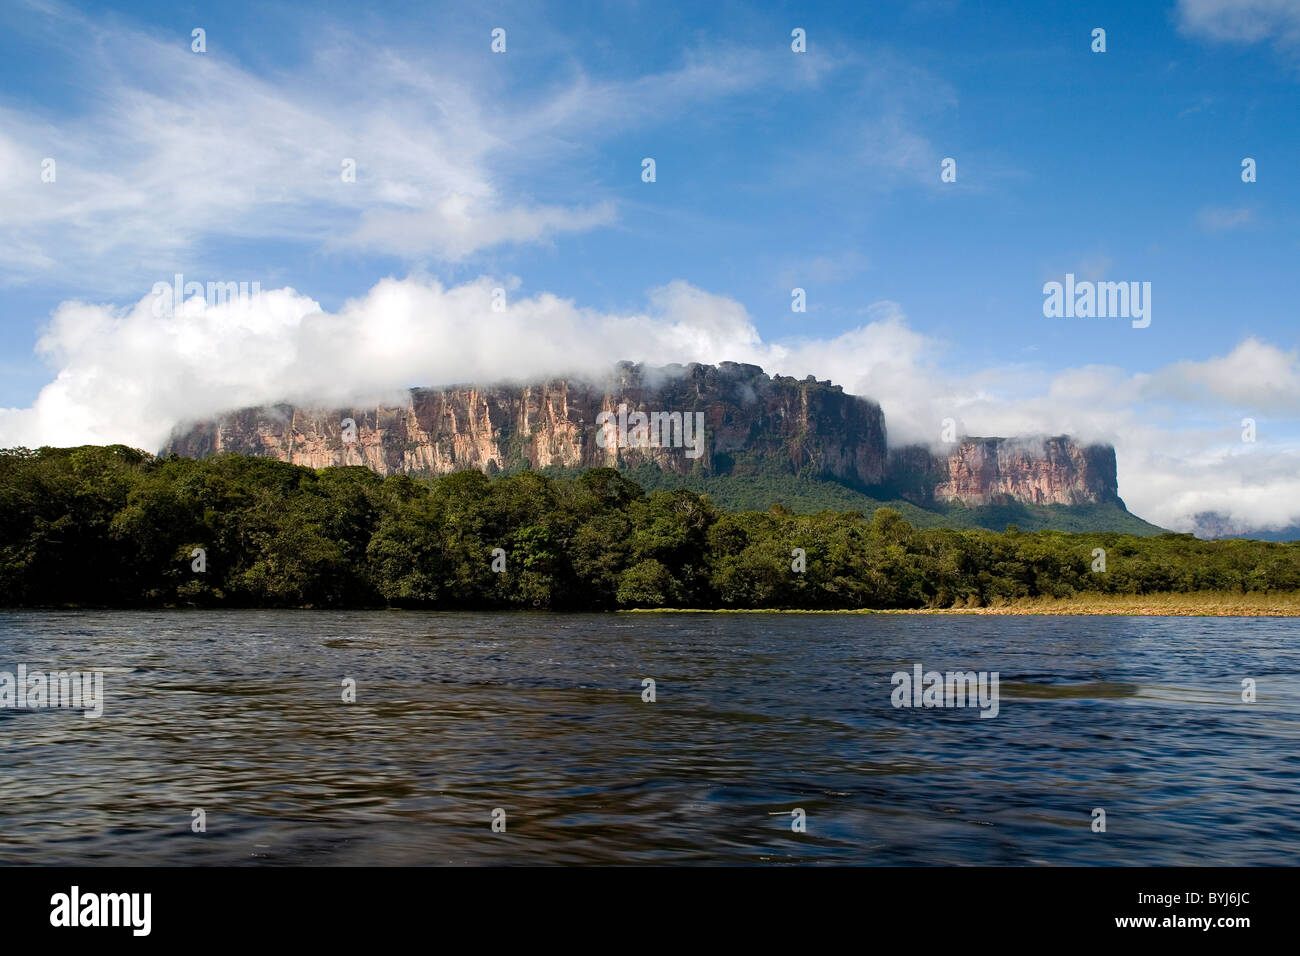 A big Tepui mountain by the coast of a river surrounded by clouds and trees, NATIONAL PARK CANAIMA, GUAYANA, VENEZUELA Stock Photo